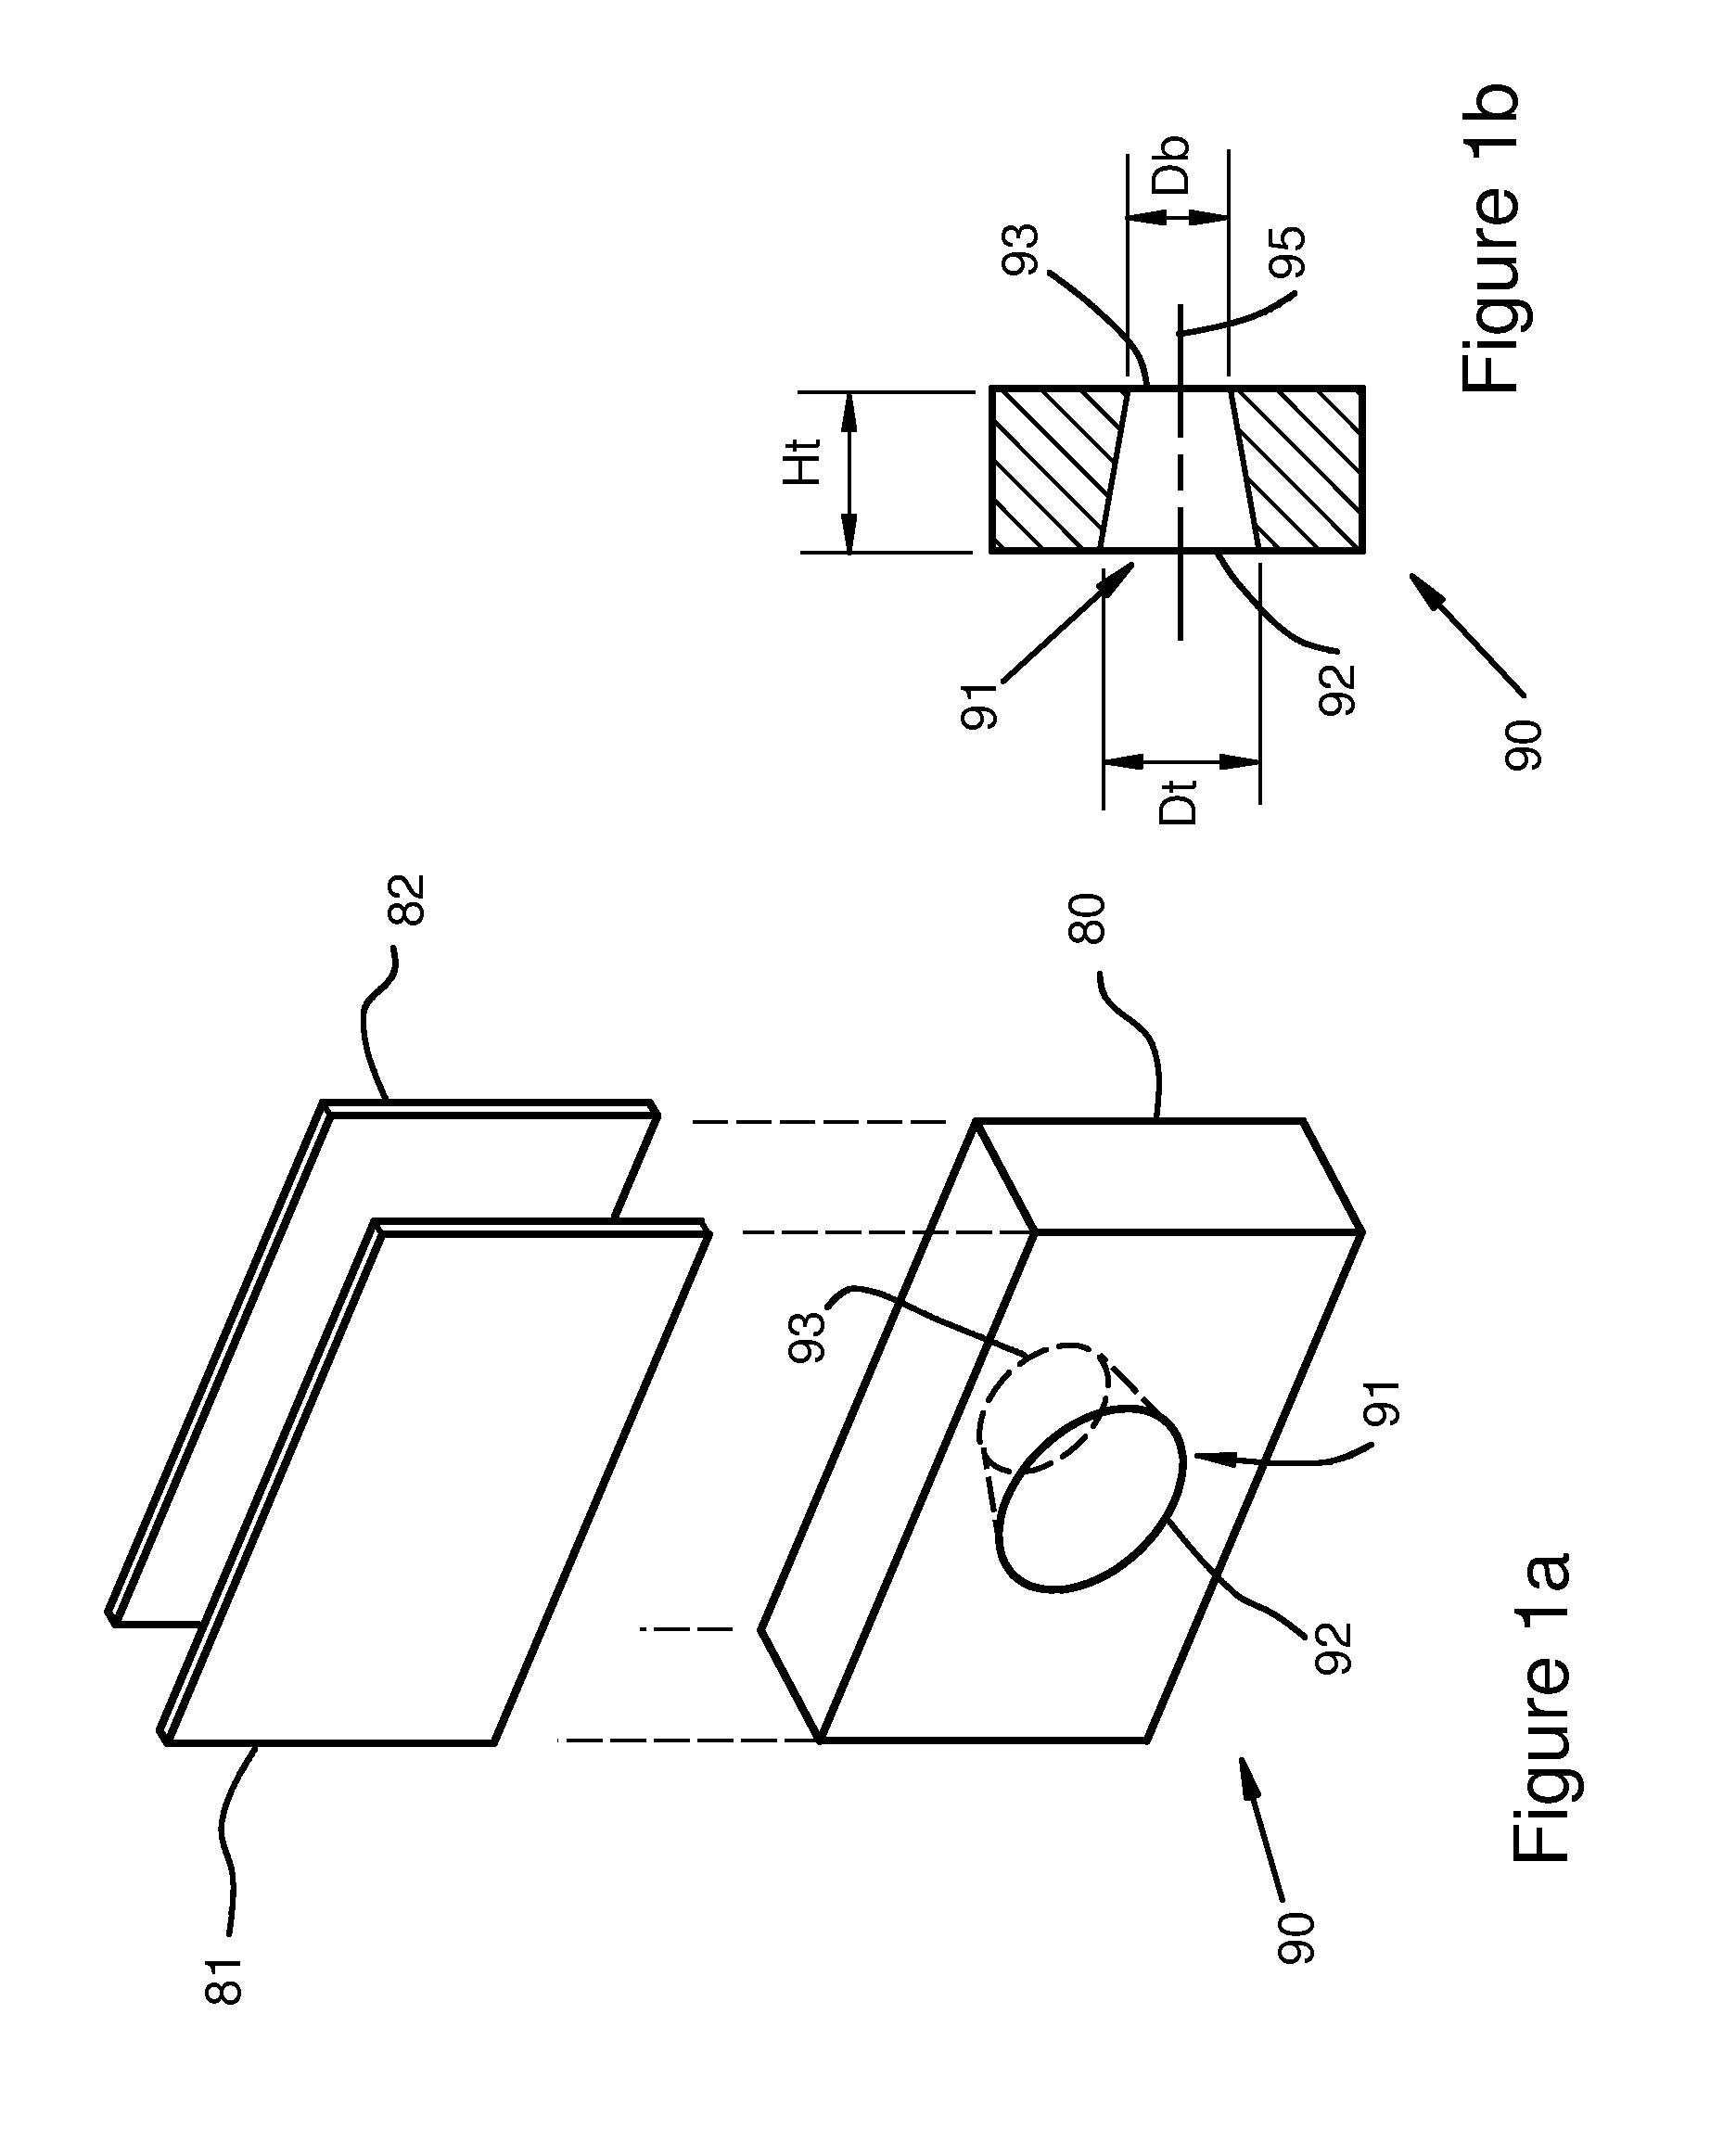 Device and method to measure bulk unconfined properties of powders